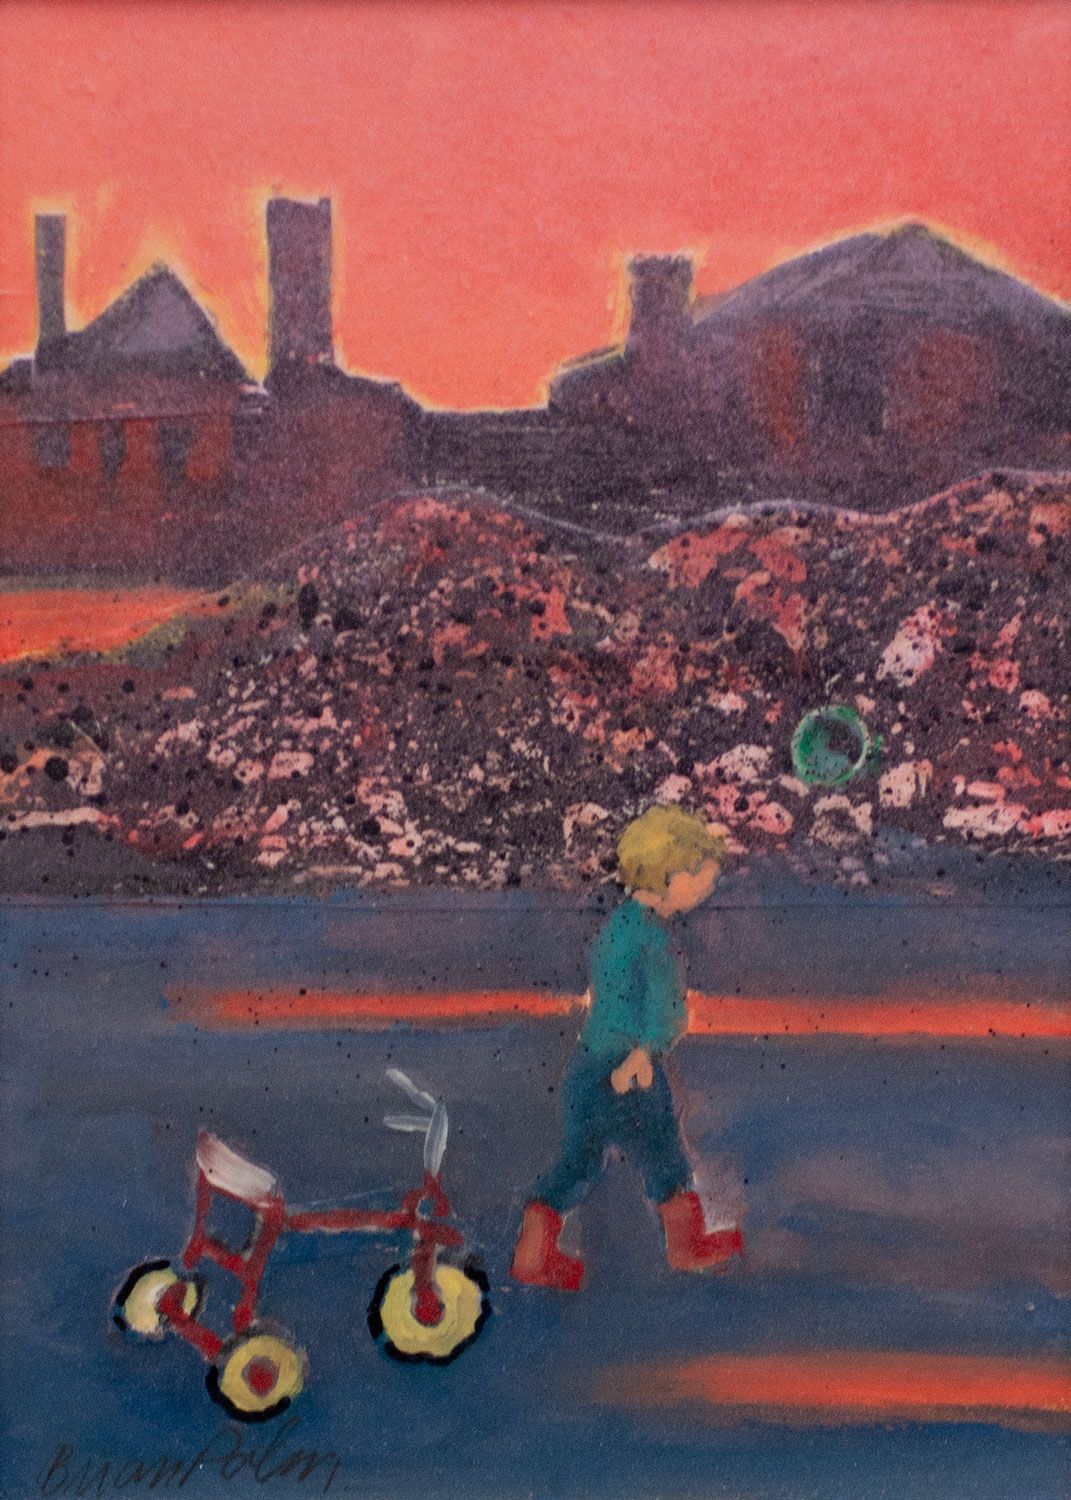 Kid with Tricycle at Sunset by Brian Palm